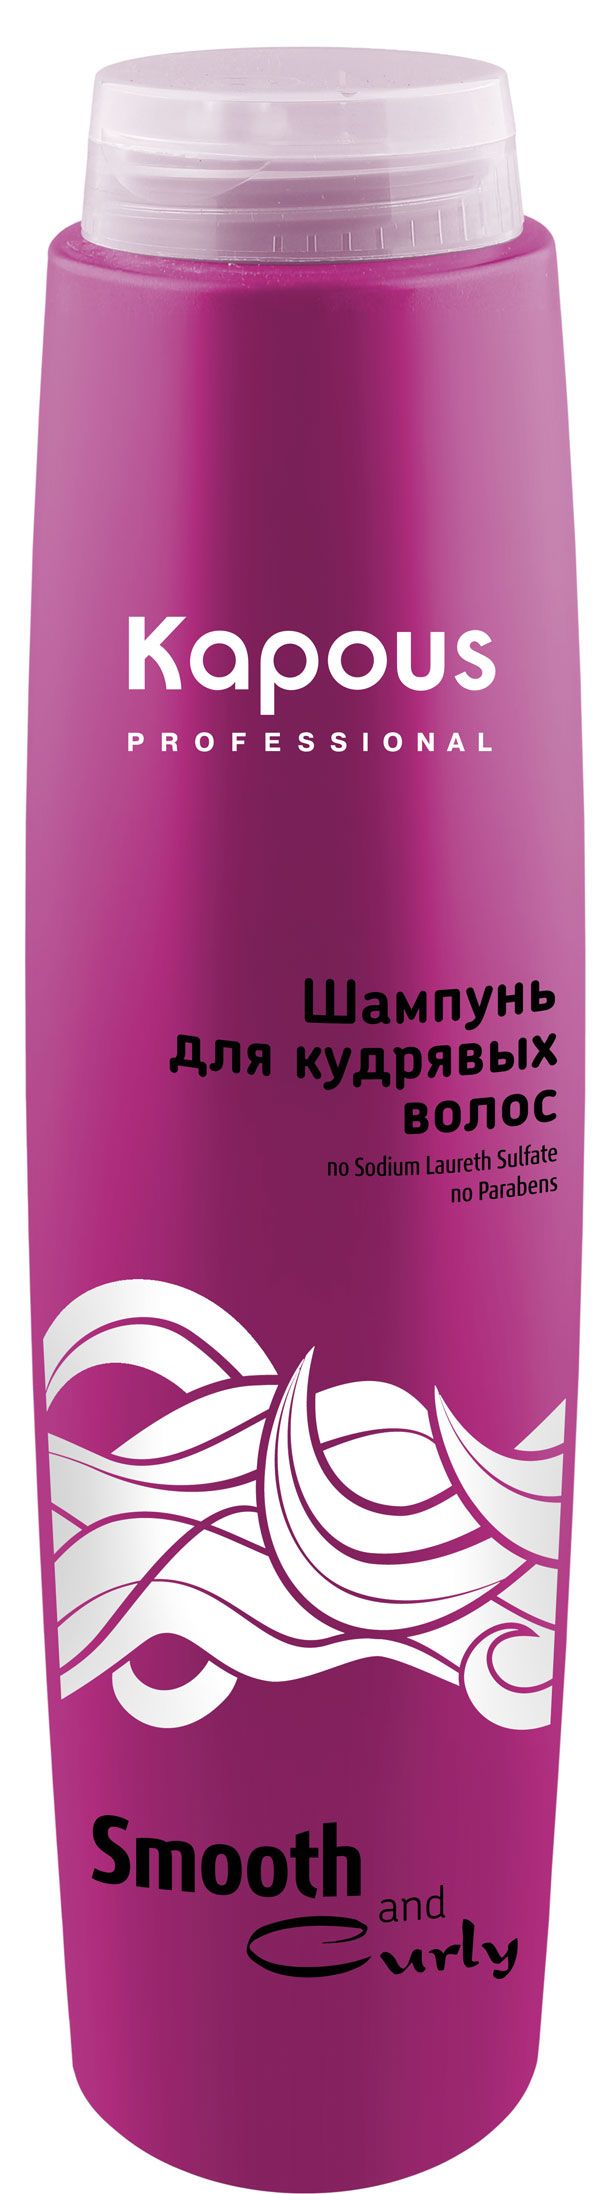 Kapous Smooth and Curly Shampoo for Curl Hair 13289